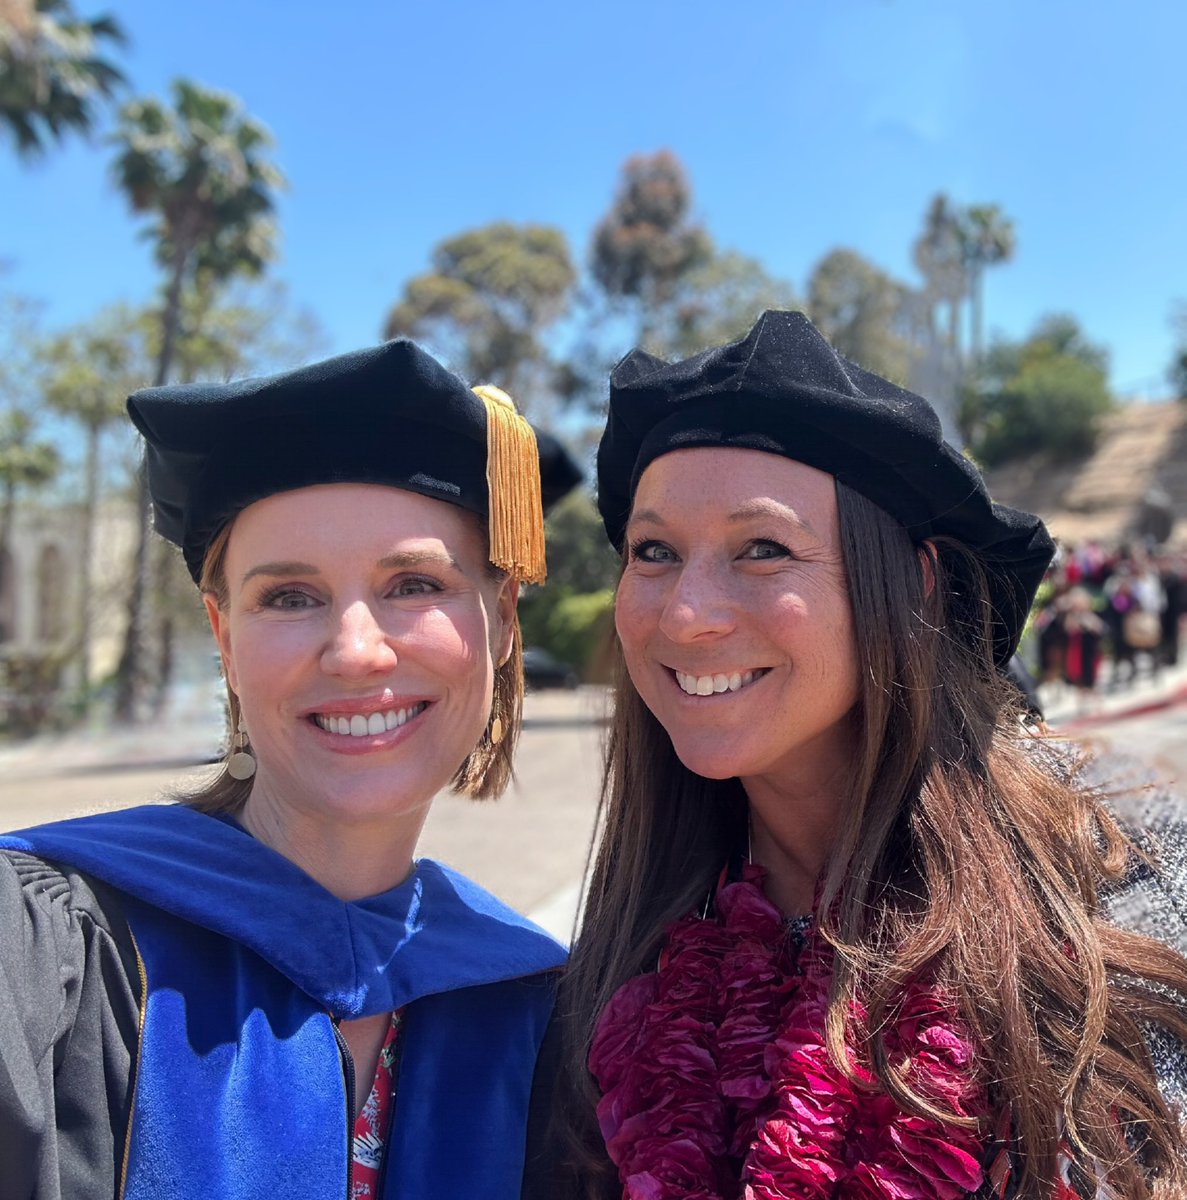 Honored to be at the conferring of Beth’s doctorate today! This gal won’t be resting on her laurels. She’s impatient with #inclusion, and I’m lucky to work with her. 👏👏👏 Congrats, Dr. Beth Fisher!